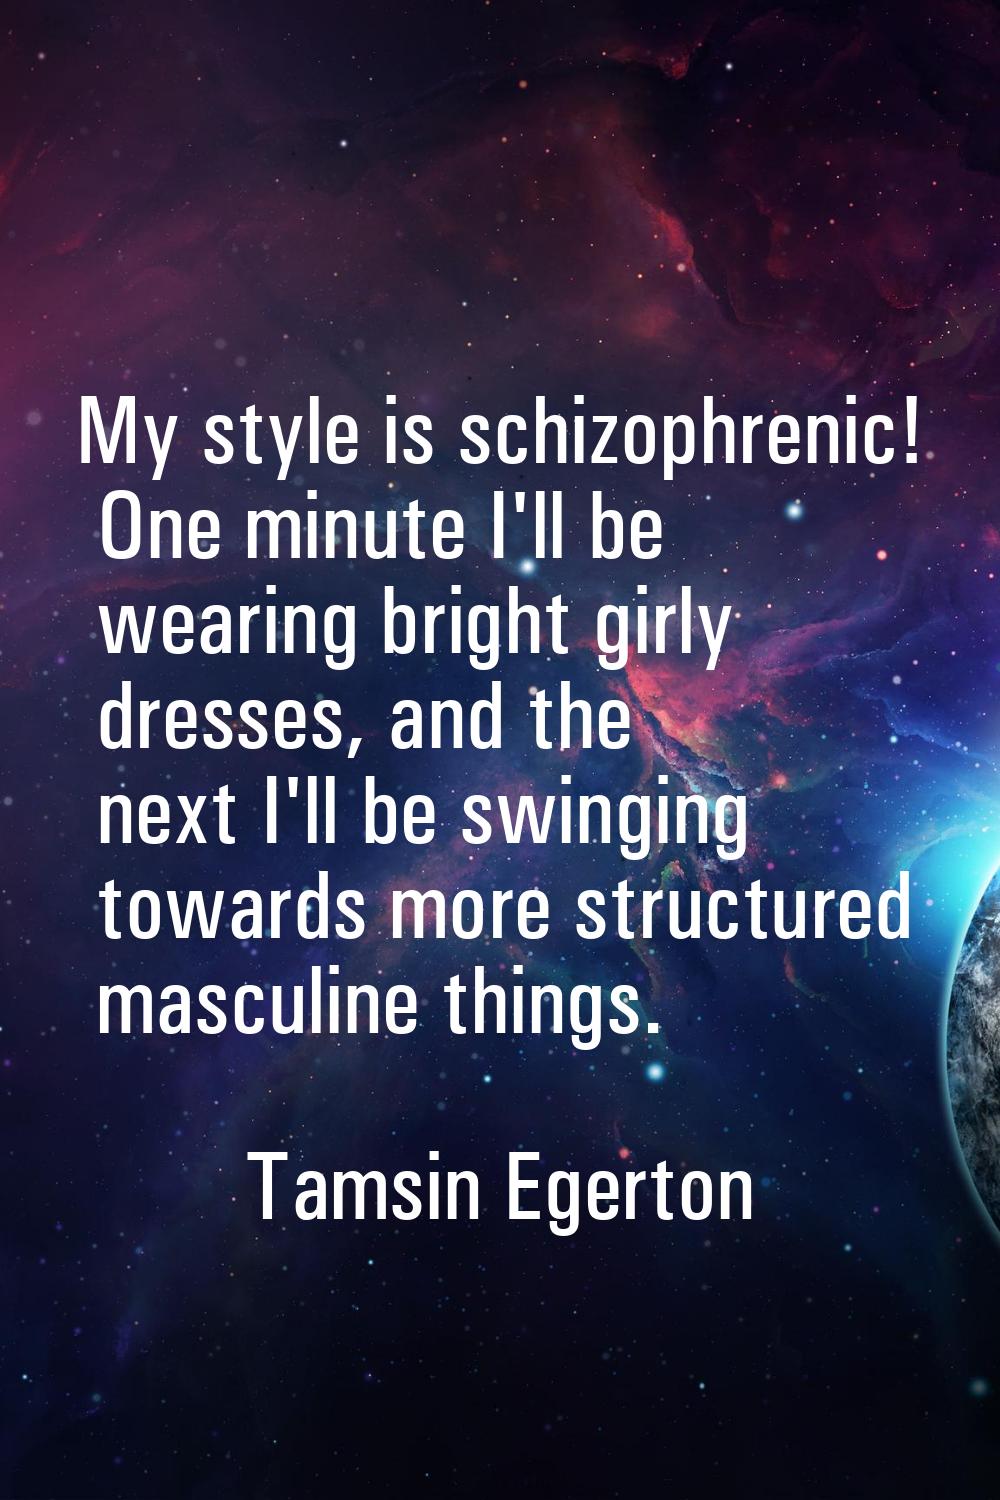 My style is schizophrenic! One minute I'll be wearing bright girly dresses, and the next I'll be sw